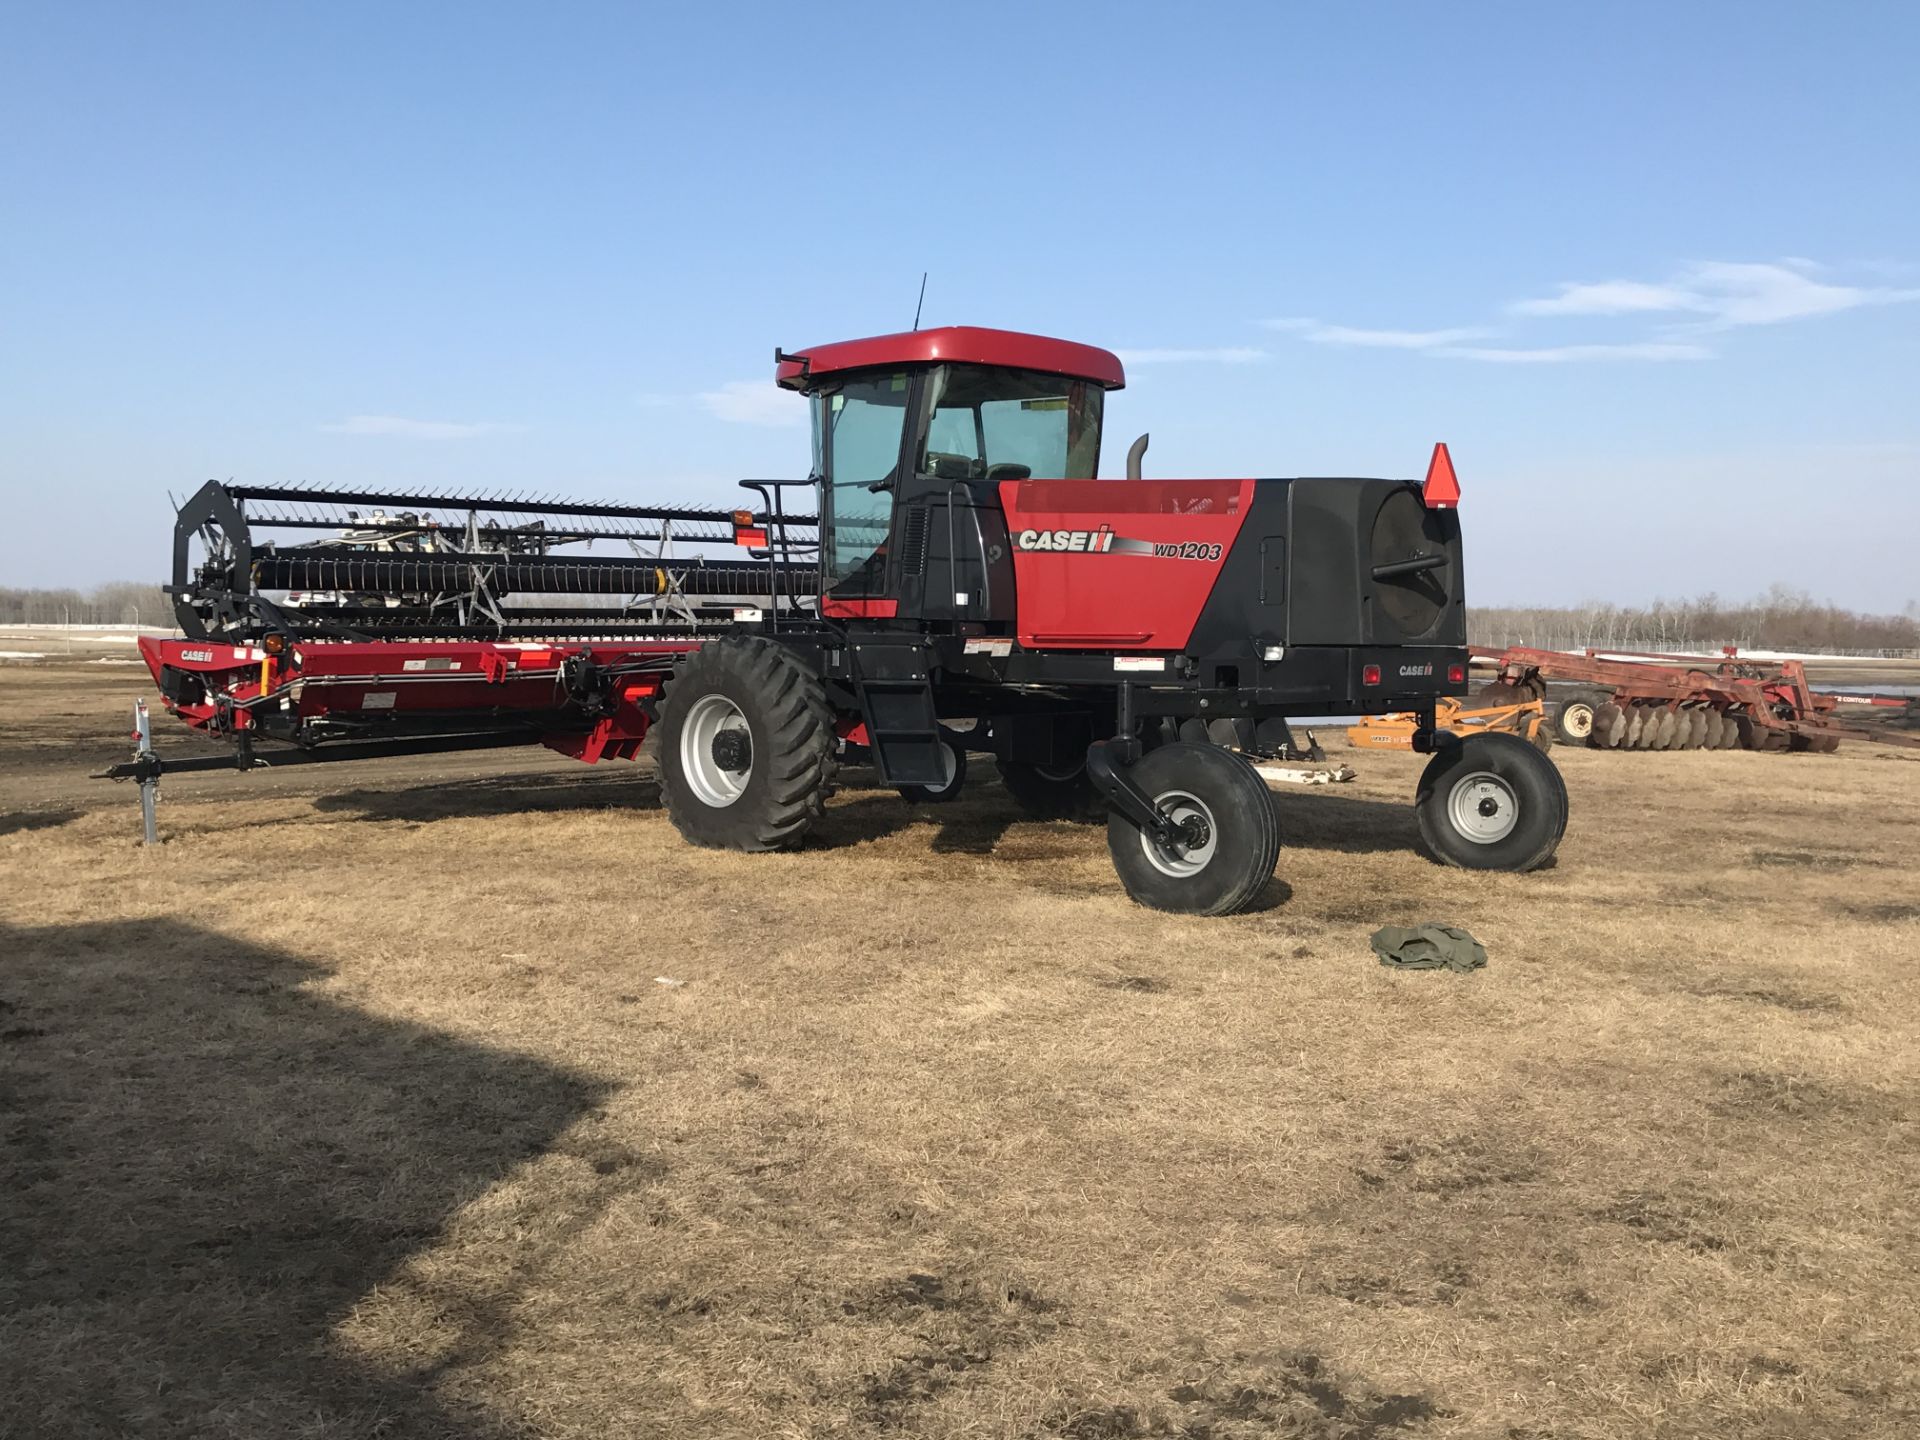 2014 CASE IH WD 1203 25' Windrower - Image 2 of 13